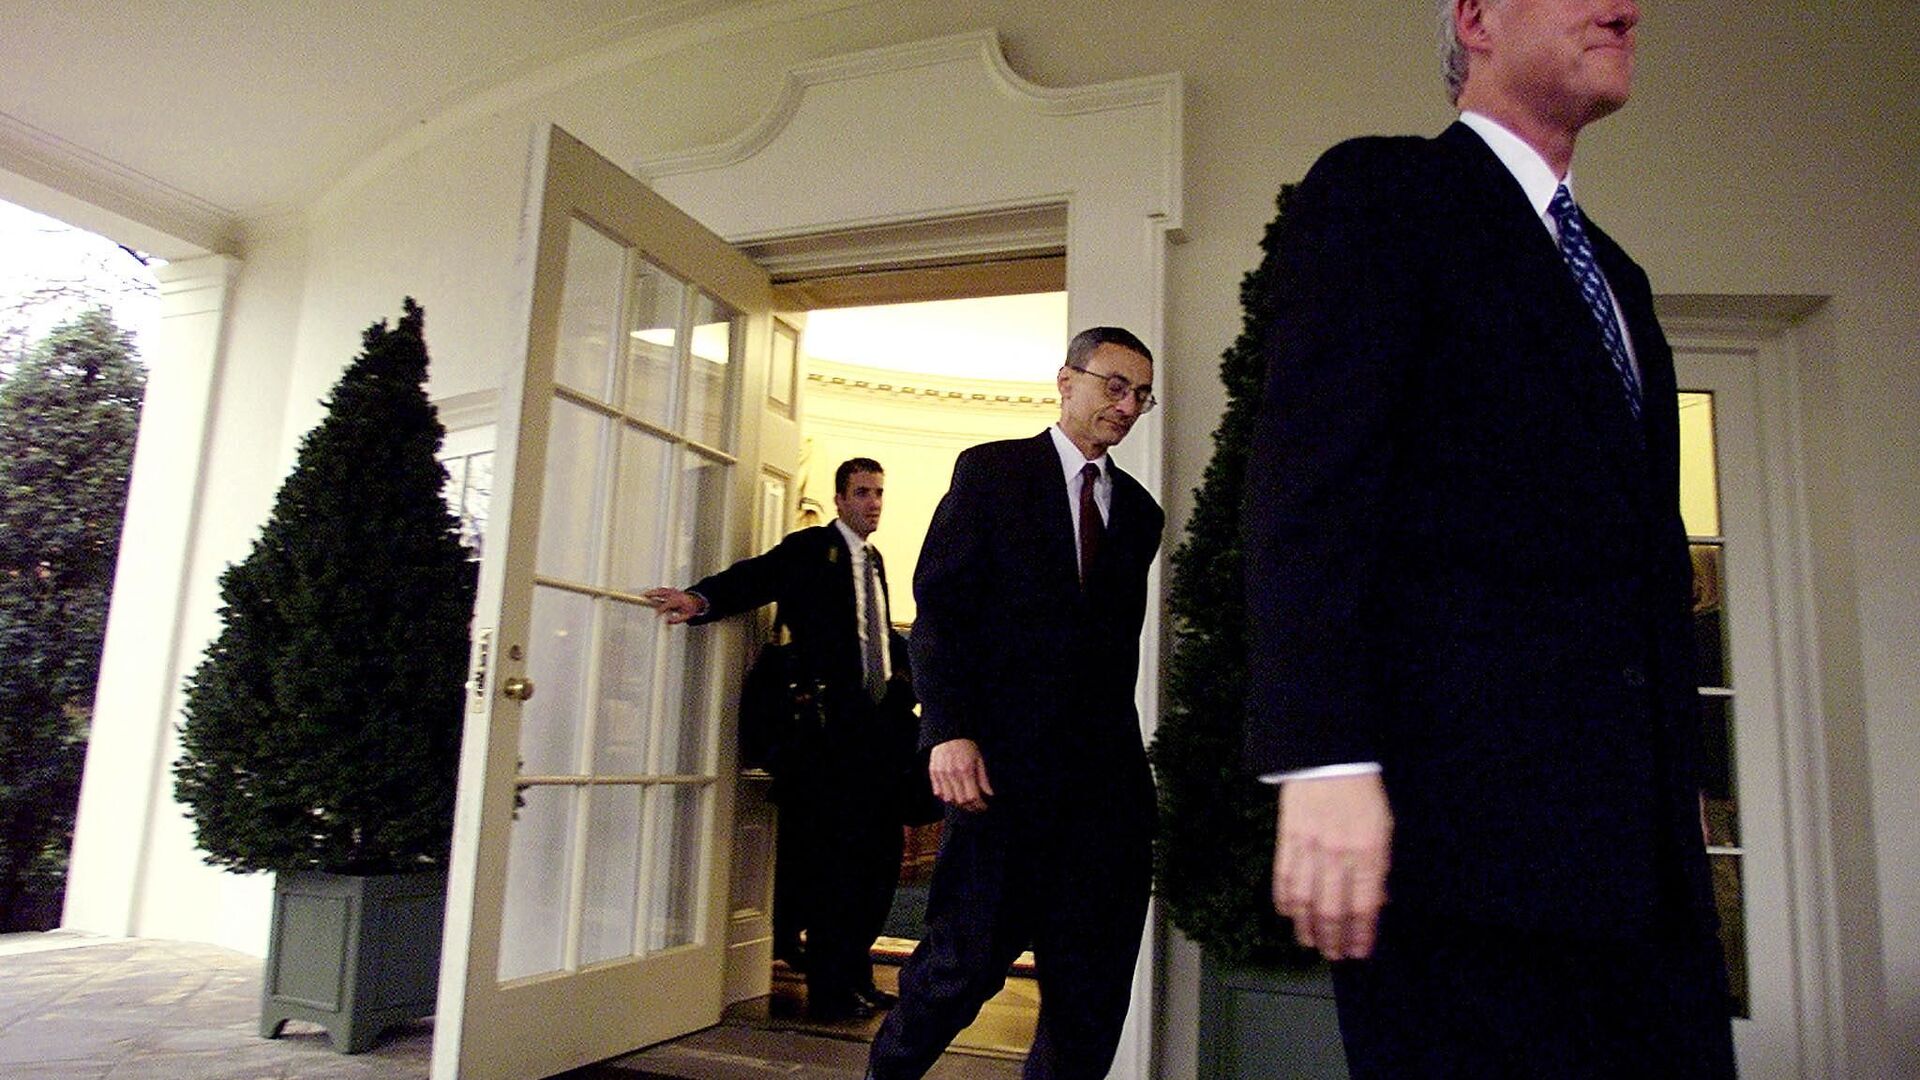 Former US President Bill Clinton (R), with his Chief of Staff John Podesta (C) and his aid Doug Band (L), leaves the Oval Office of the White House for the last time 20 January, 2001, in Washington - Sputnik International, 1920, 11.03.2021